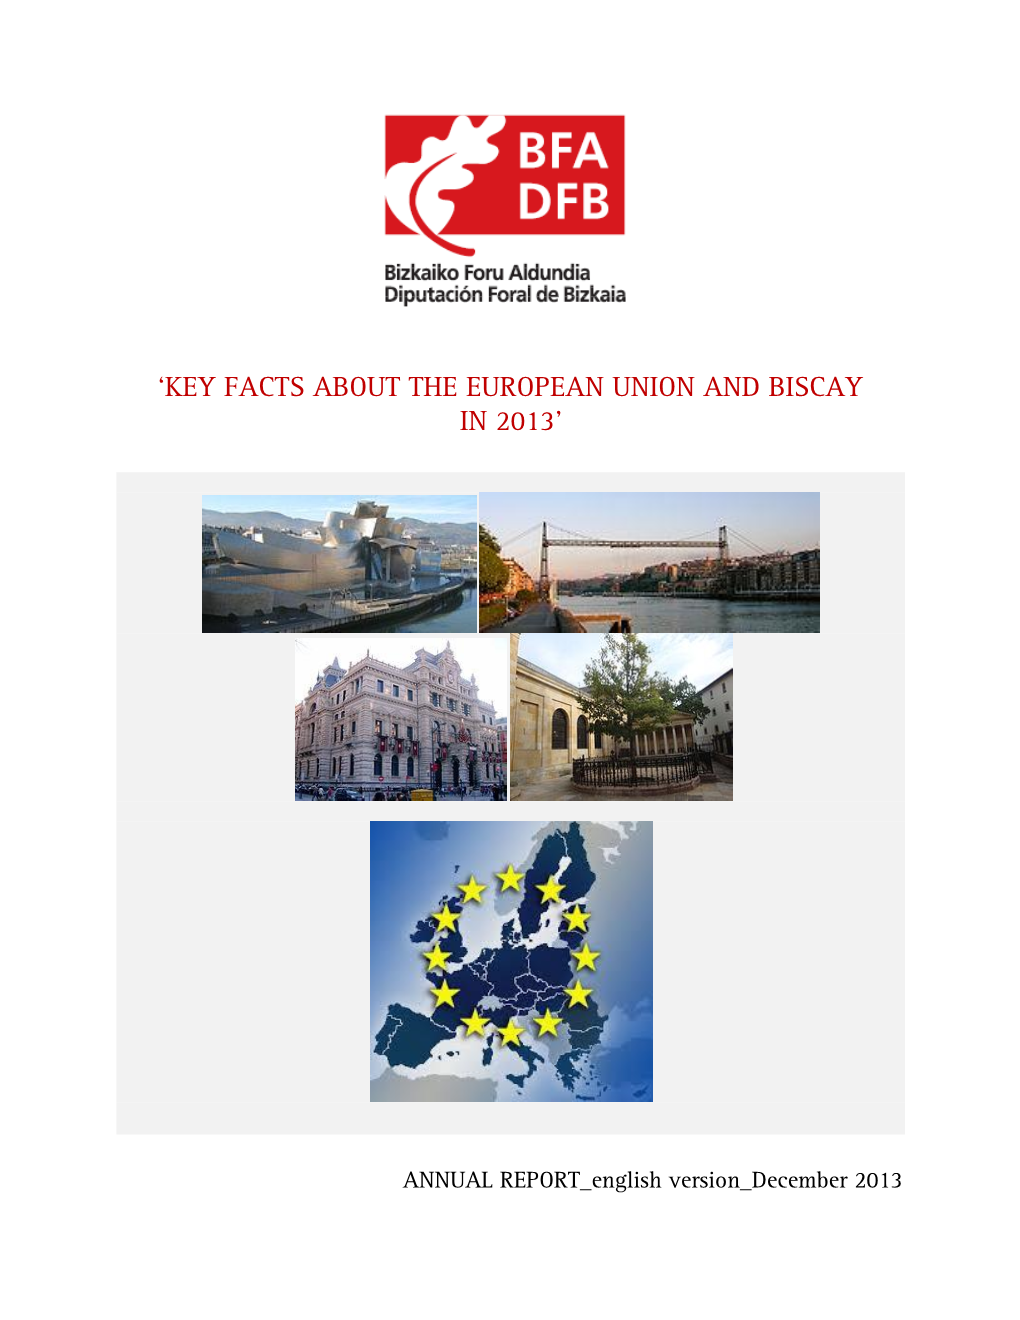 Key Facts About the European Union and Biscay in 2013’